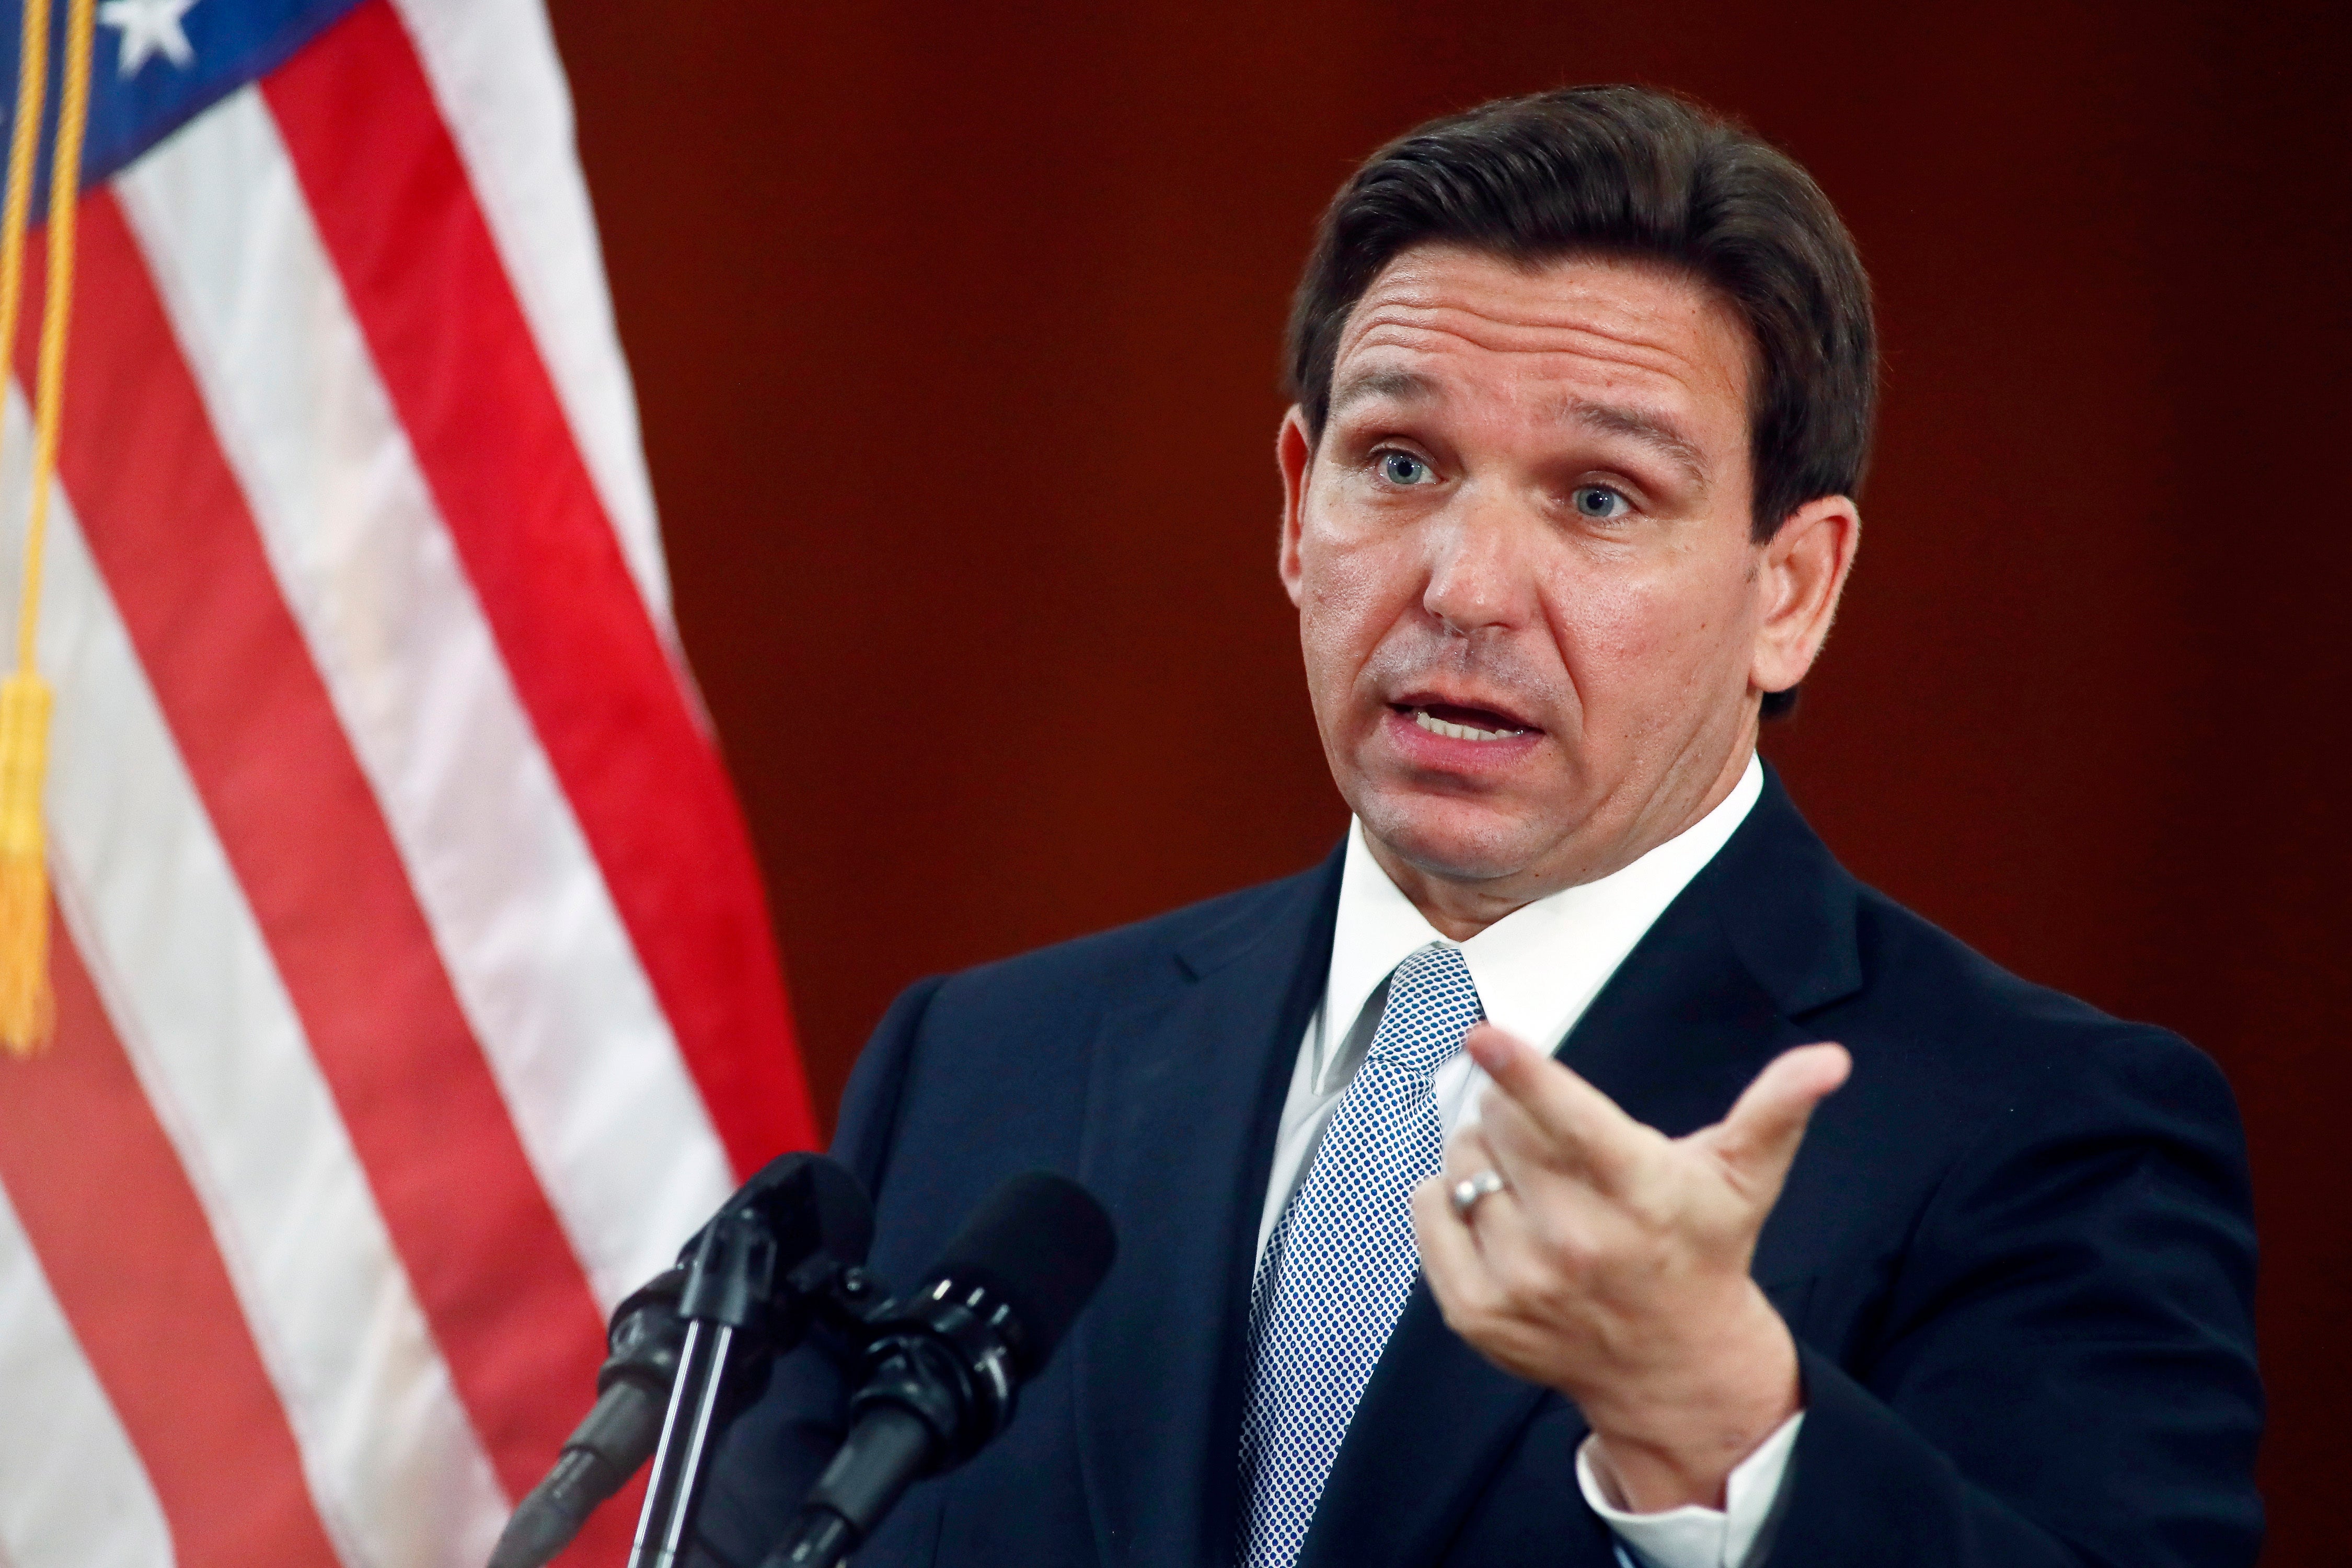 Florida Governor Ron DeSantis speaks on 7 March 2023, at the state Capitol in Tallahassee, Florida. On Wednesday, the governor signed a bill requiring communism be taught to grade school students starting in the 2026-2027 school year